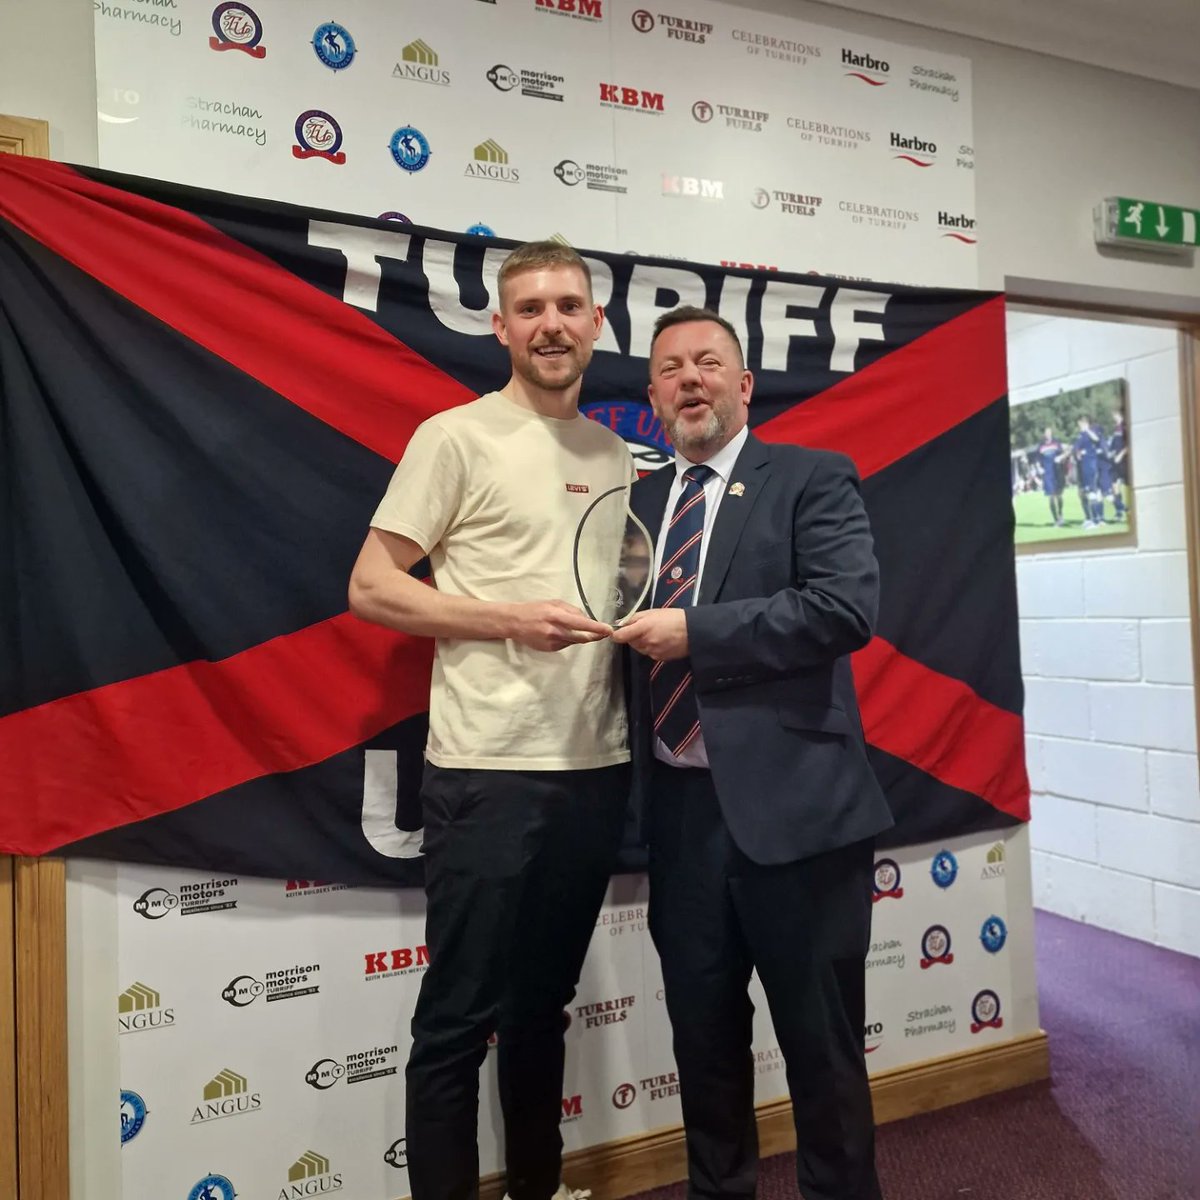 Next up we had the Player's Player of the Year as sponsored by Keith Builders Merchants and presented by Jeff Smith to..... @ewanclark7